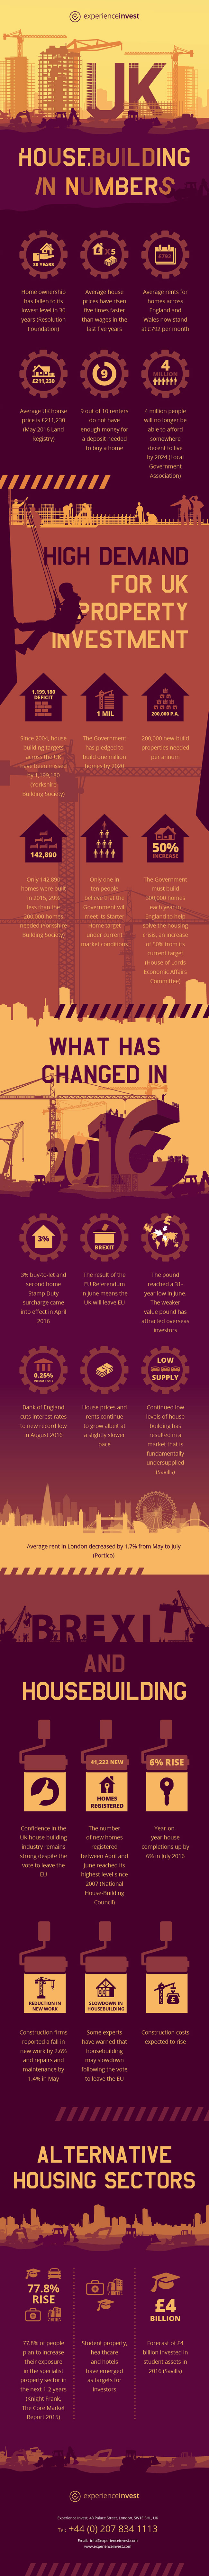 UK House Building in Numbers